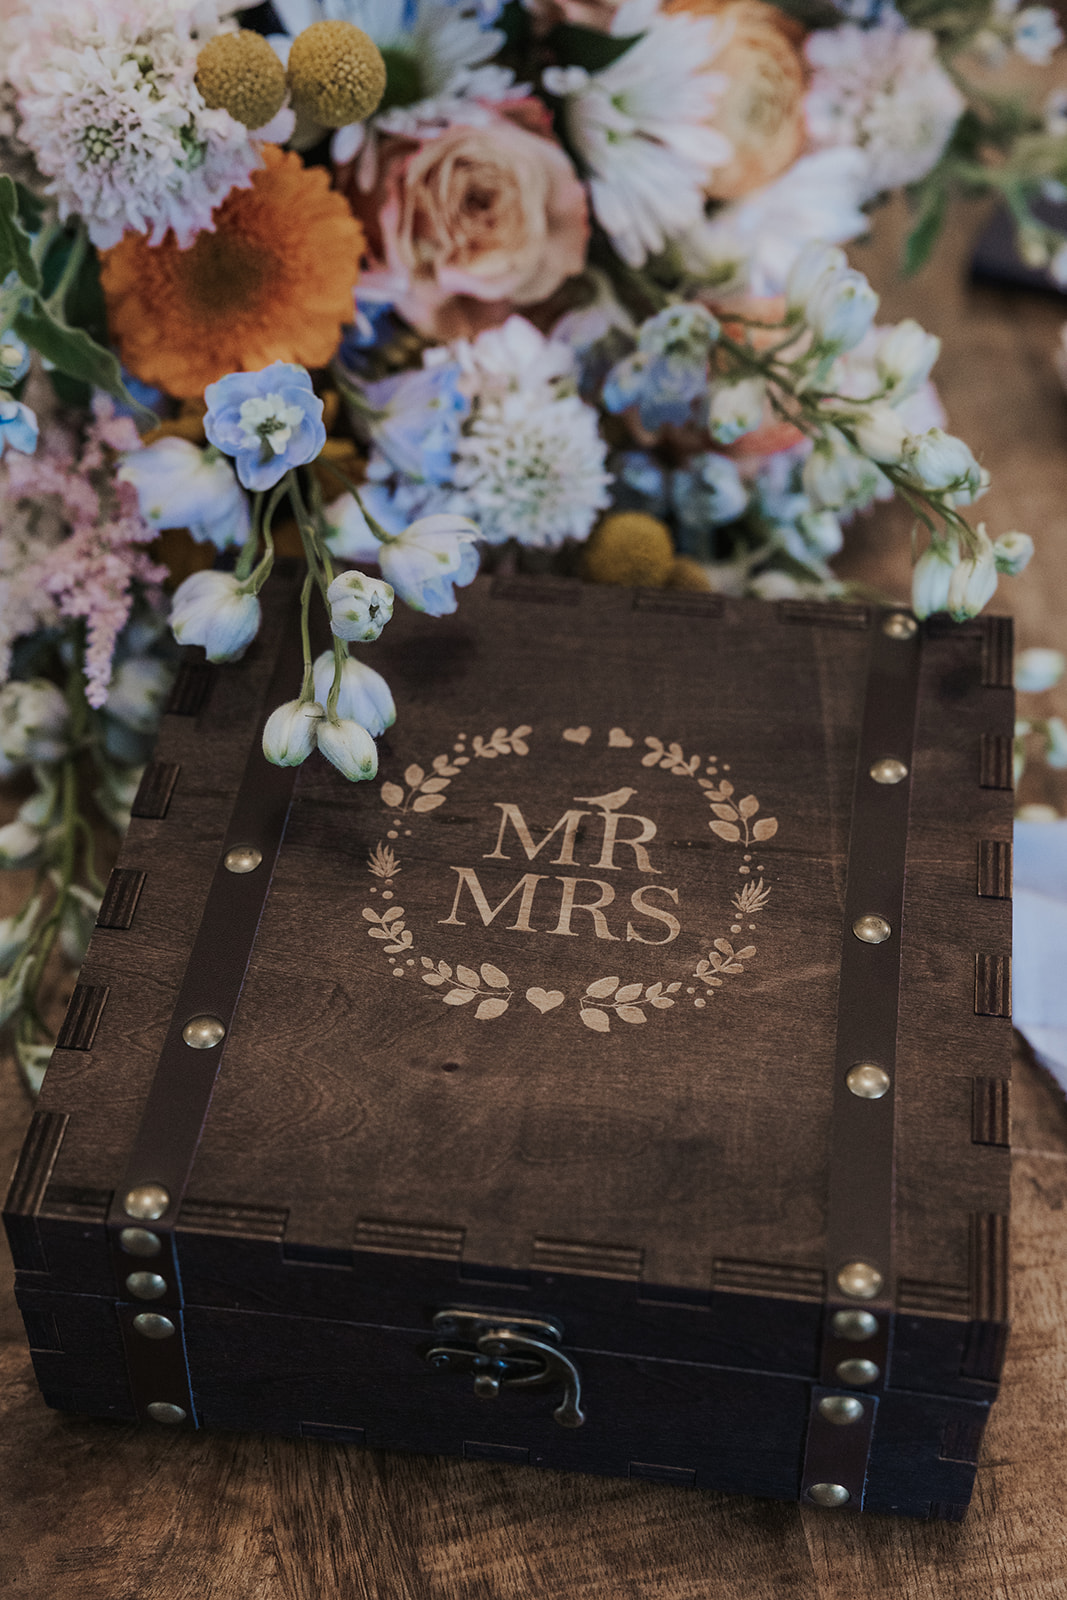 Mr & Mrs vintage style guestbook from sentimental Georgia wedding